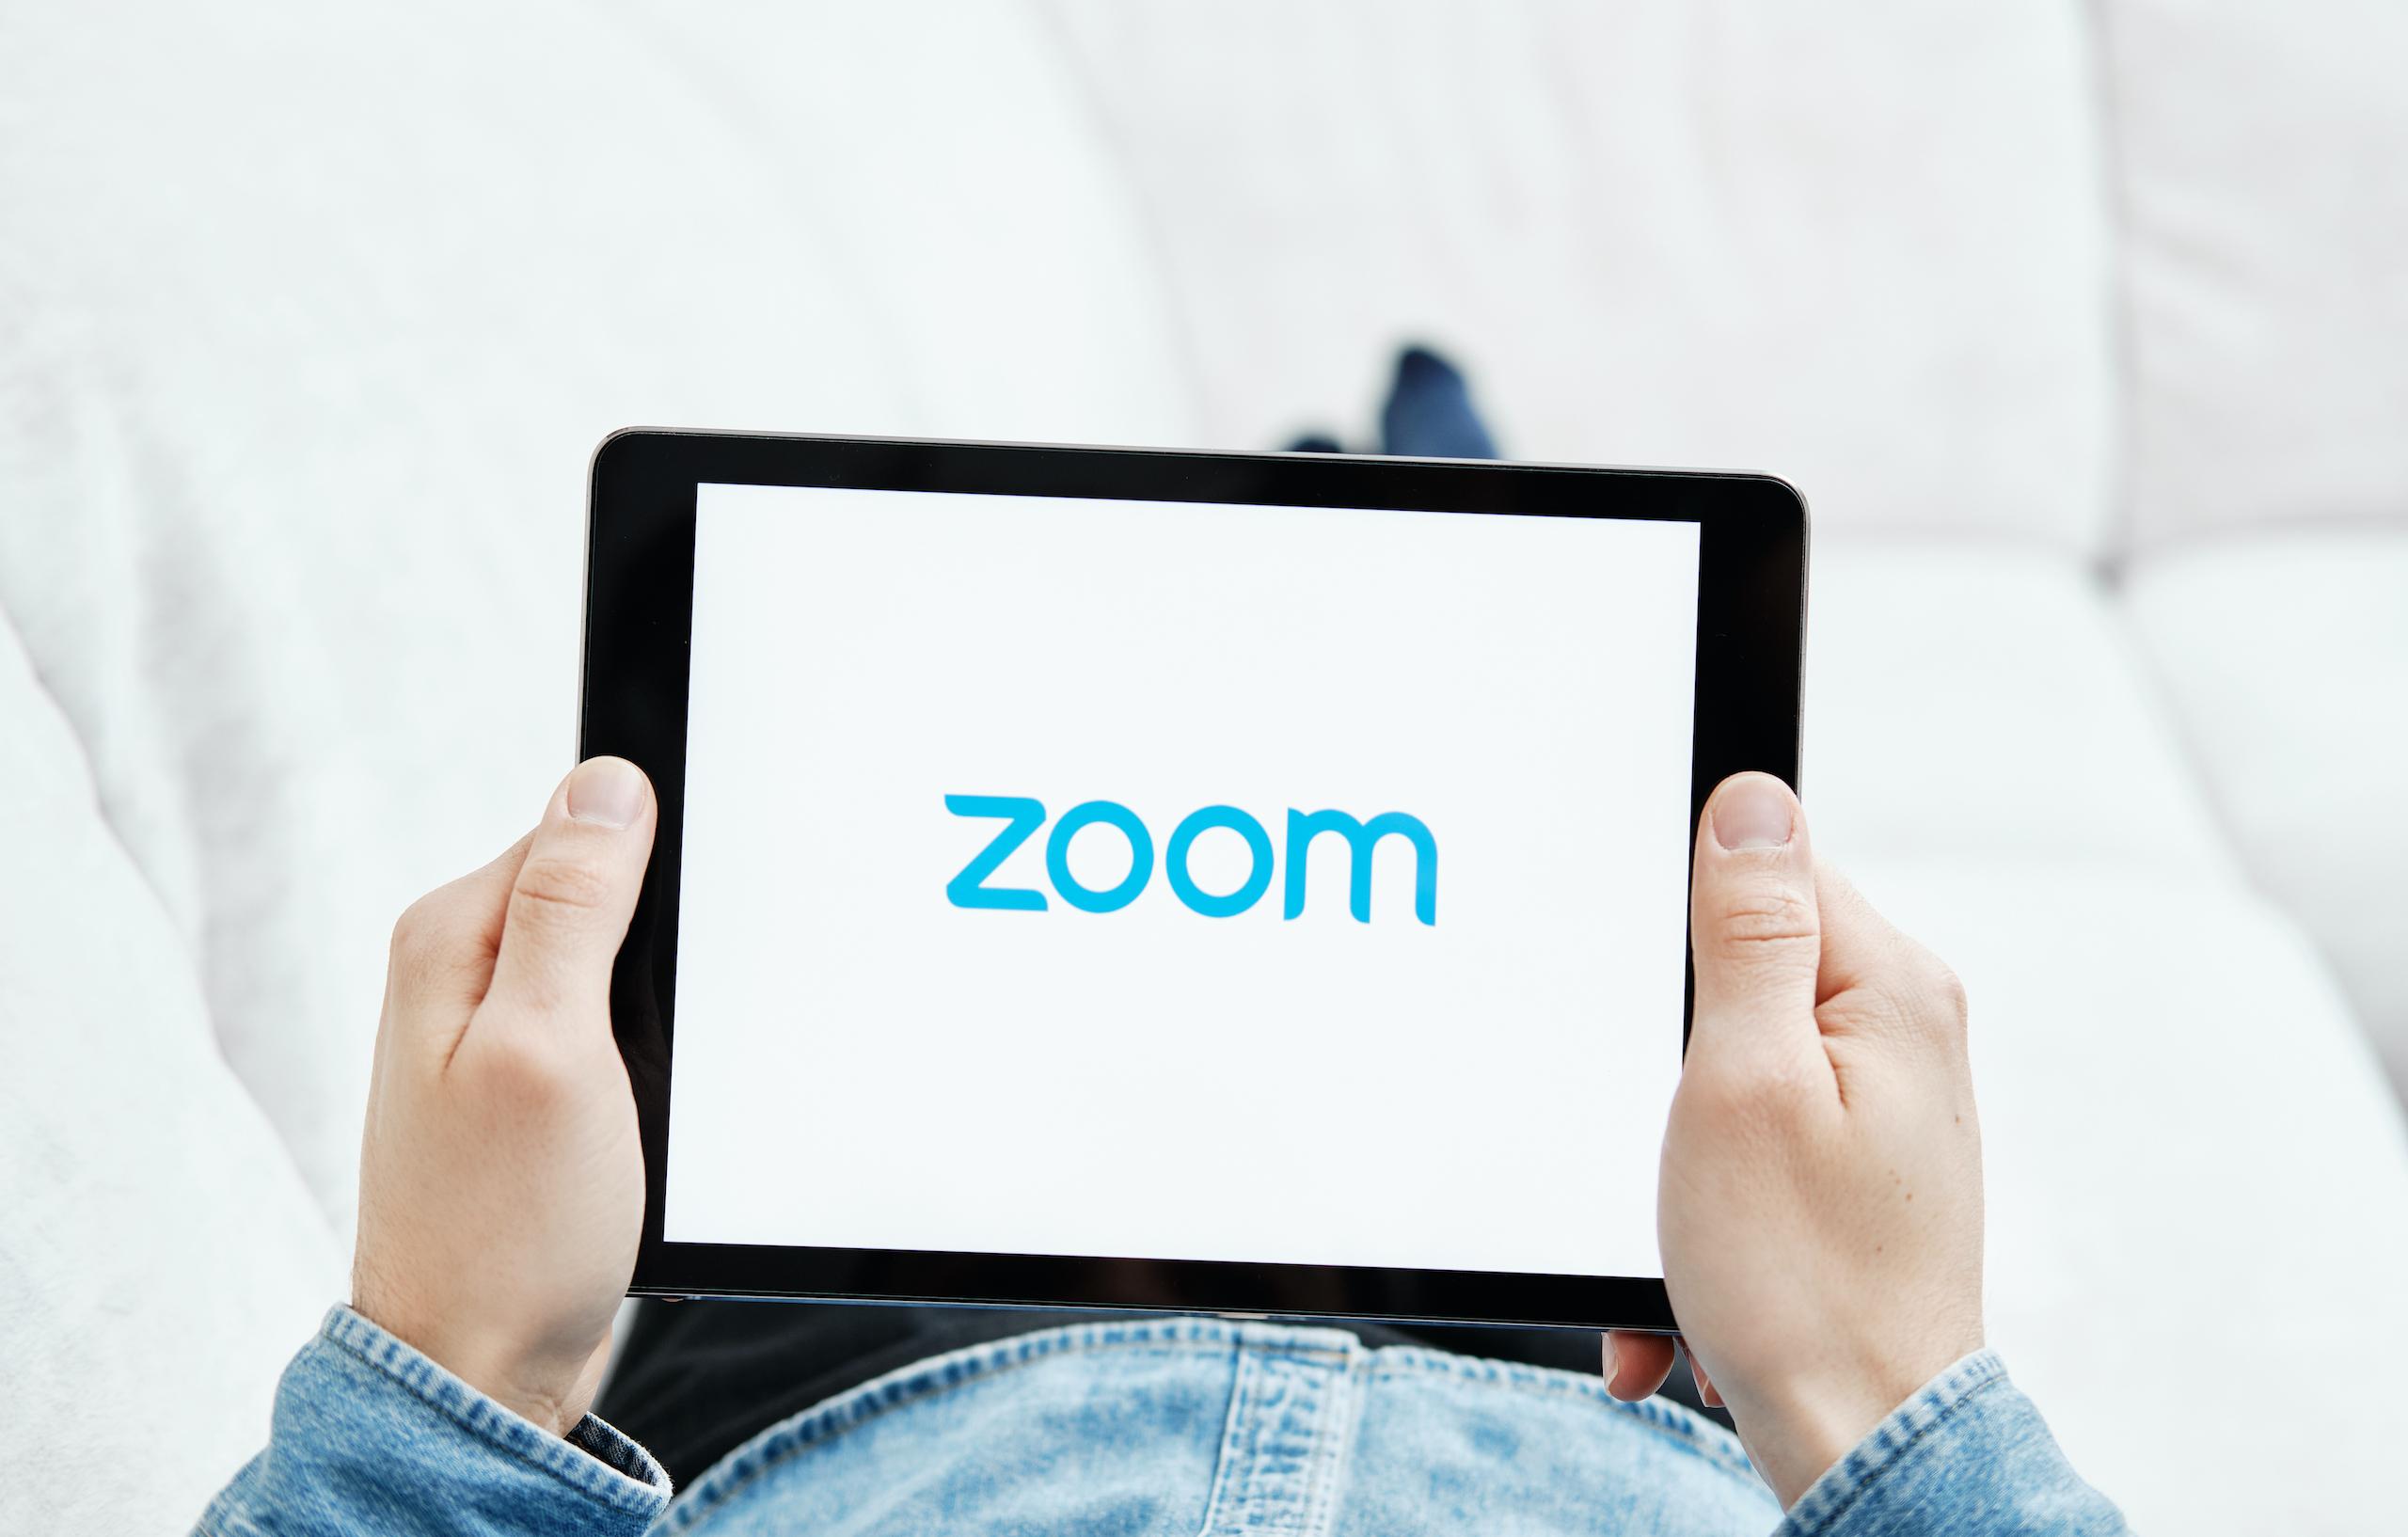 How to Keep Your Online Meetings Secure and Avoid "Zoom-Bombing"